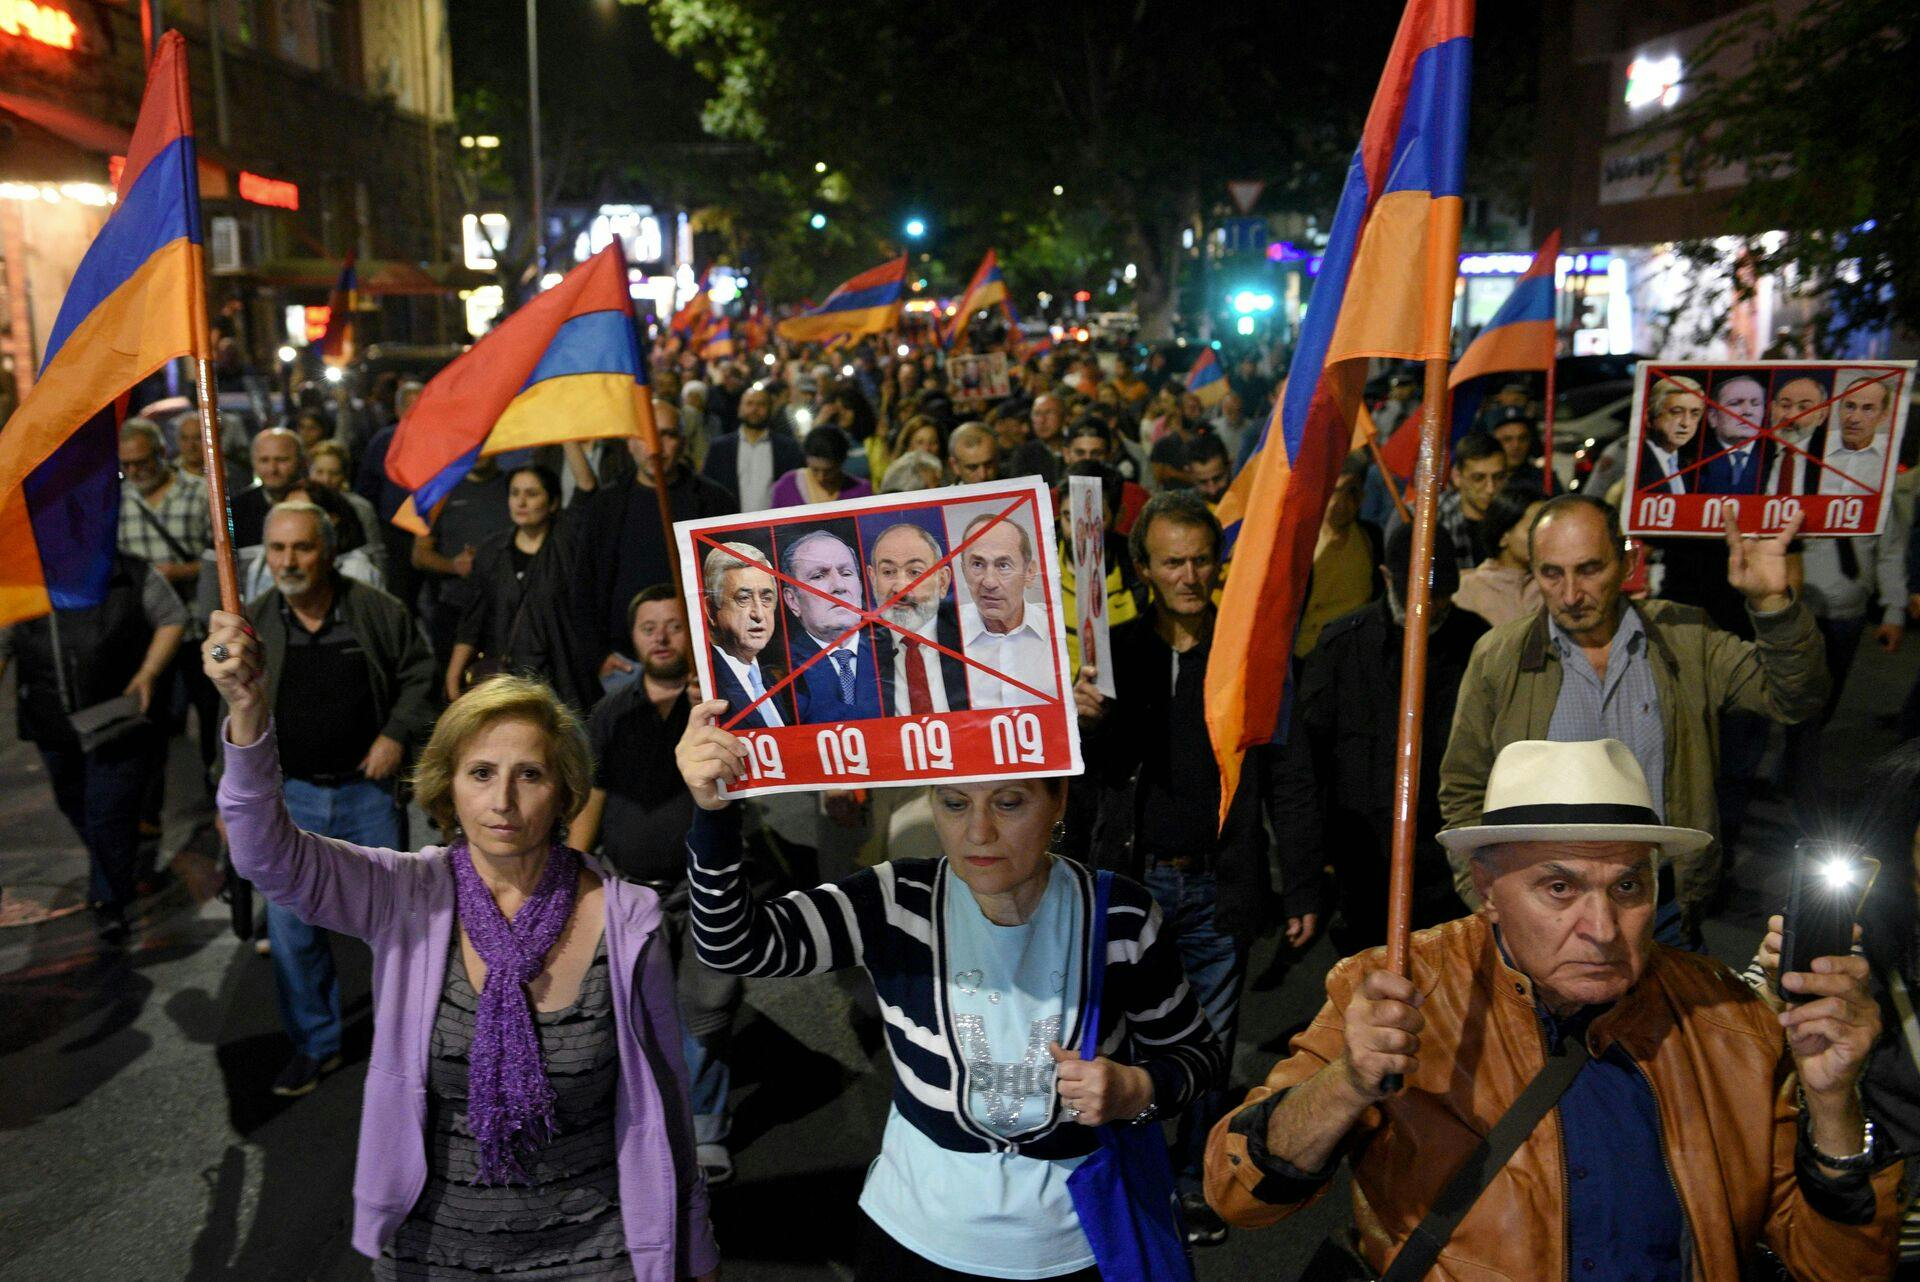 People take part in an anti-government rally in downtown Yerevan on September 25, 2023, following Azerbaijani military operations against Armenian separatist forces in Nagorno-Karabakh. (Photo by KAREN MINASYAN / AFP)